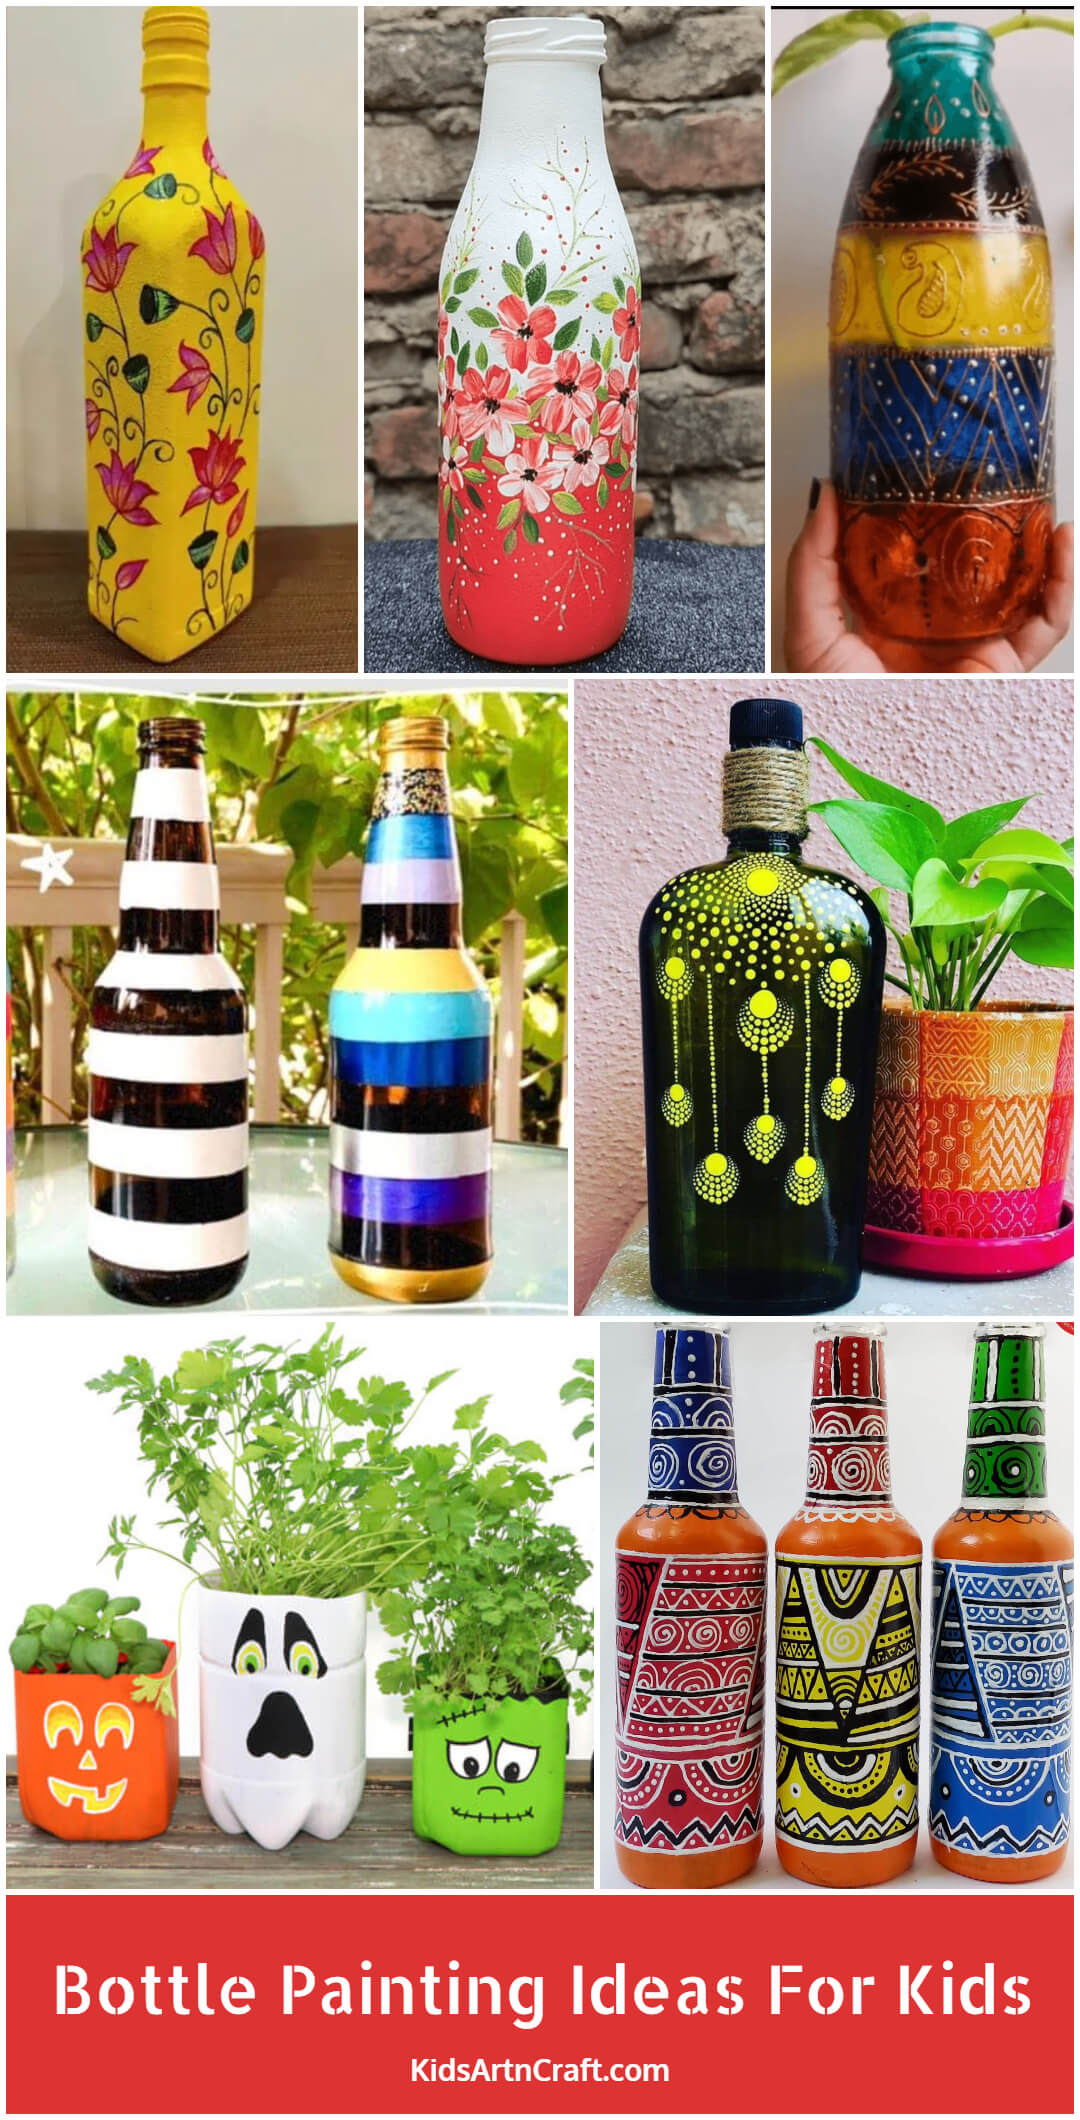 Plastic bottles crafts - Ideas to reuse as garden decorations